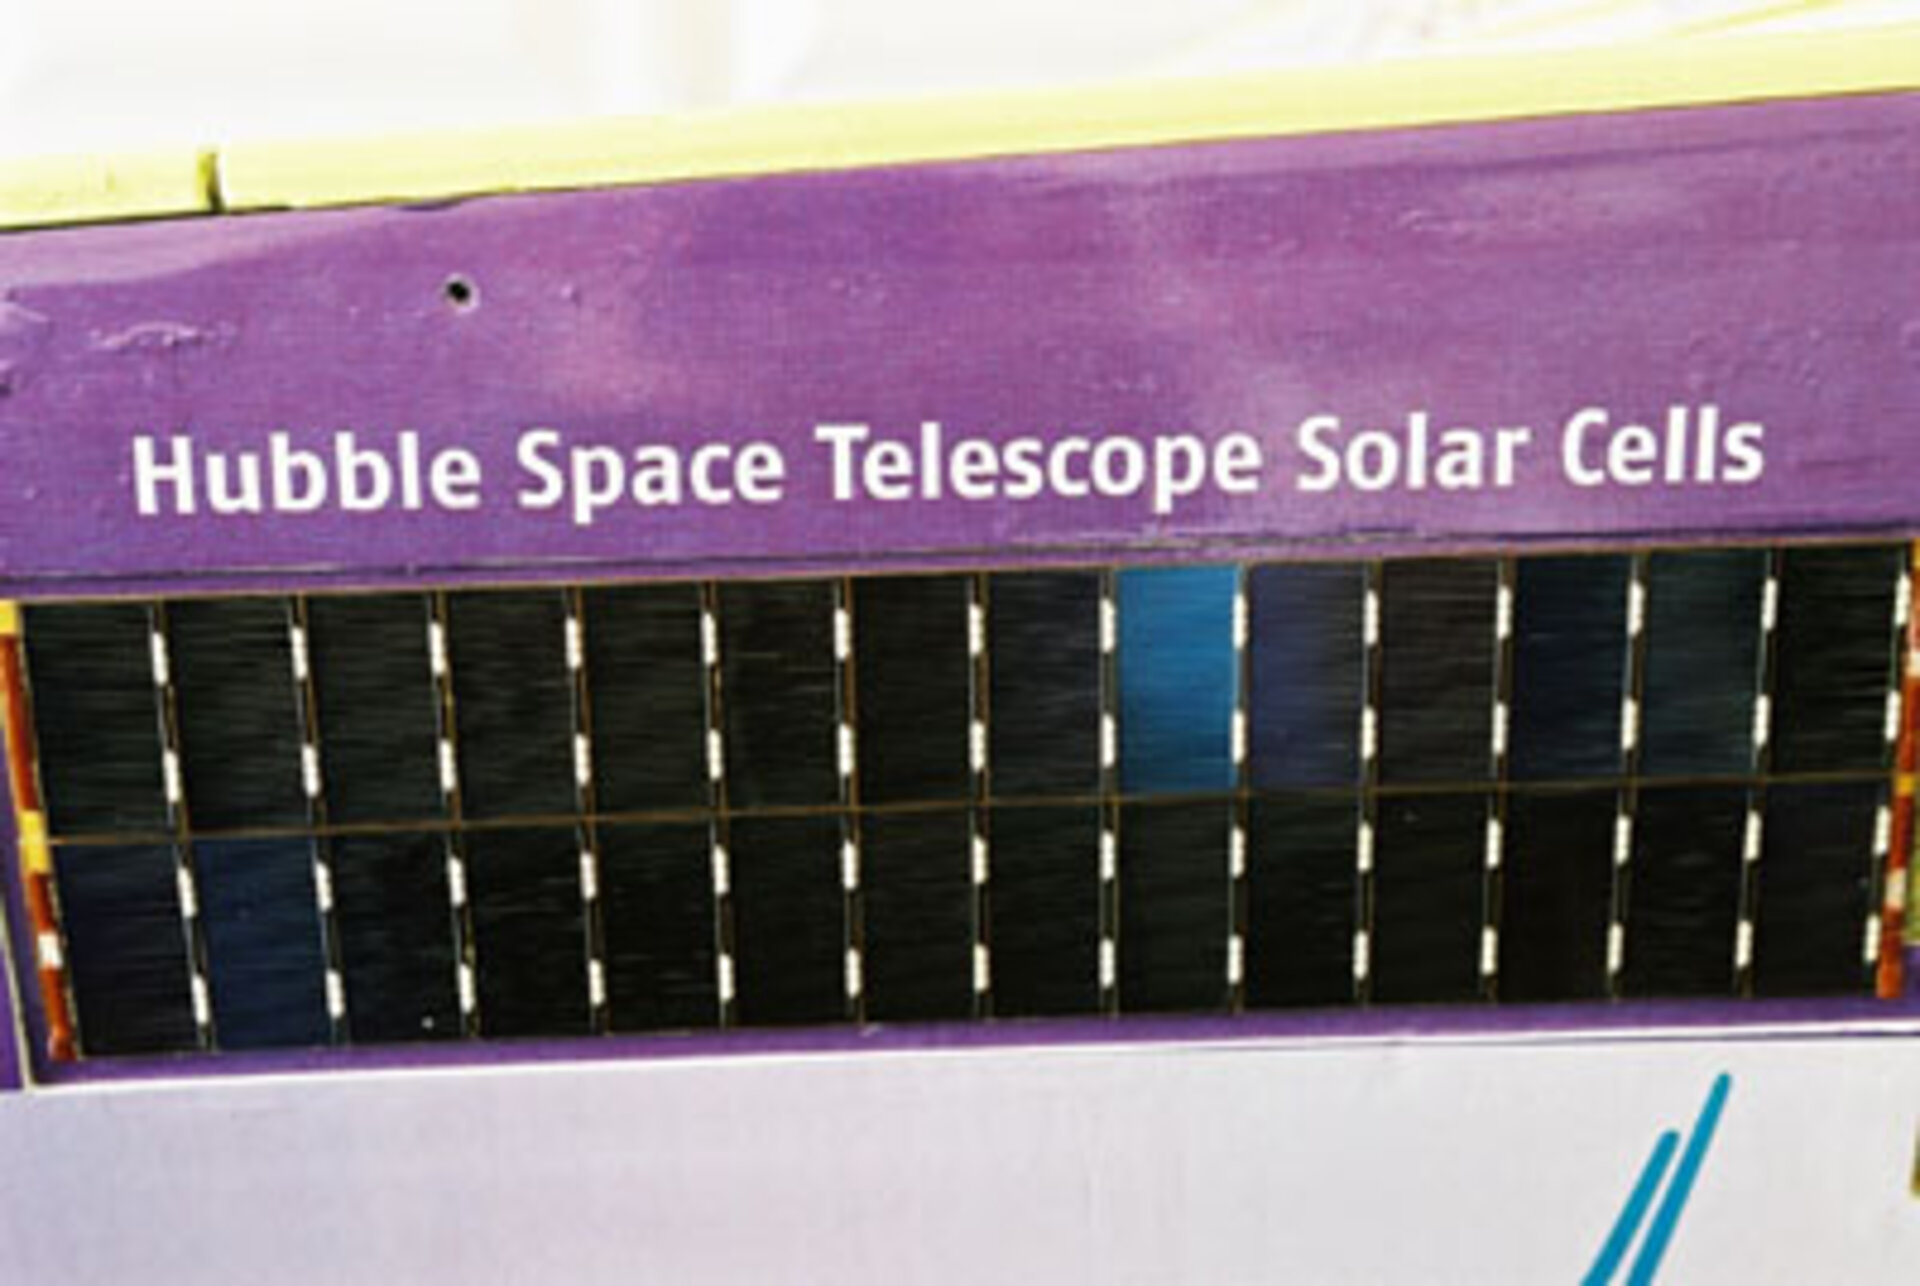 Solar panels from the Hubble Space Telescope